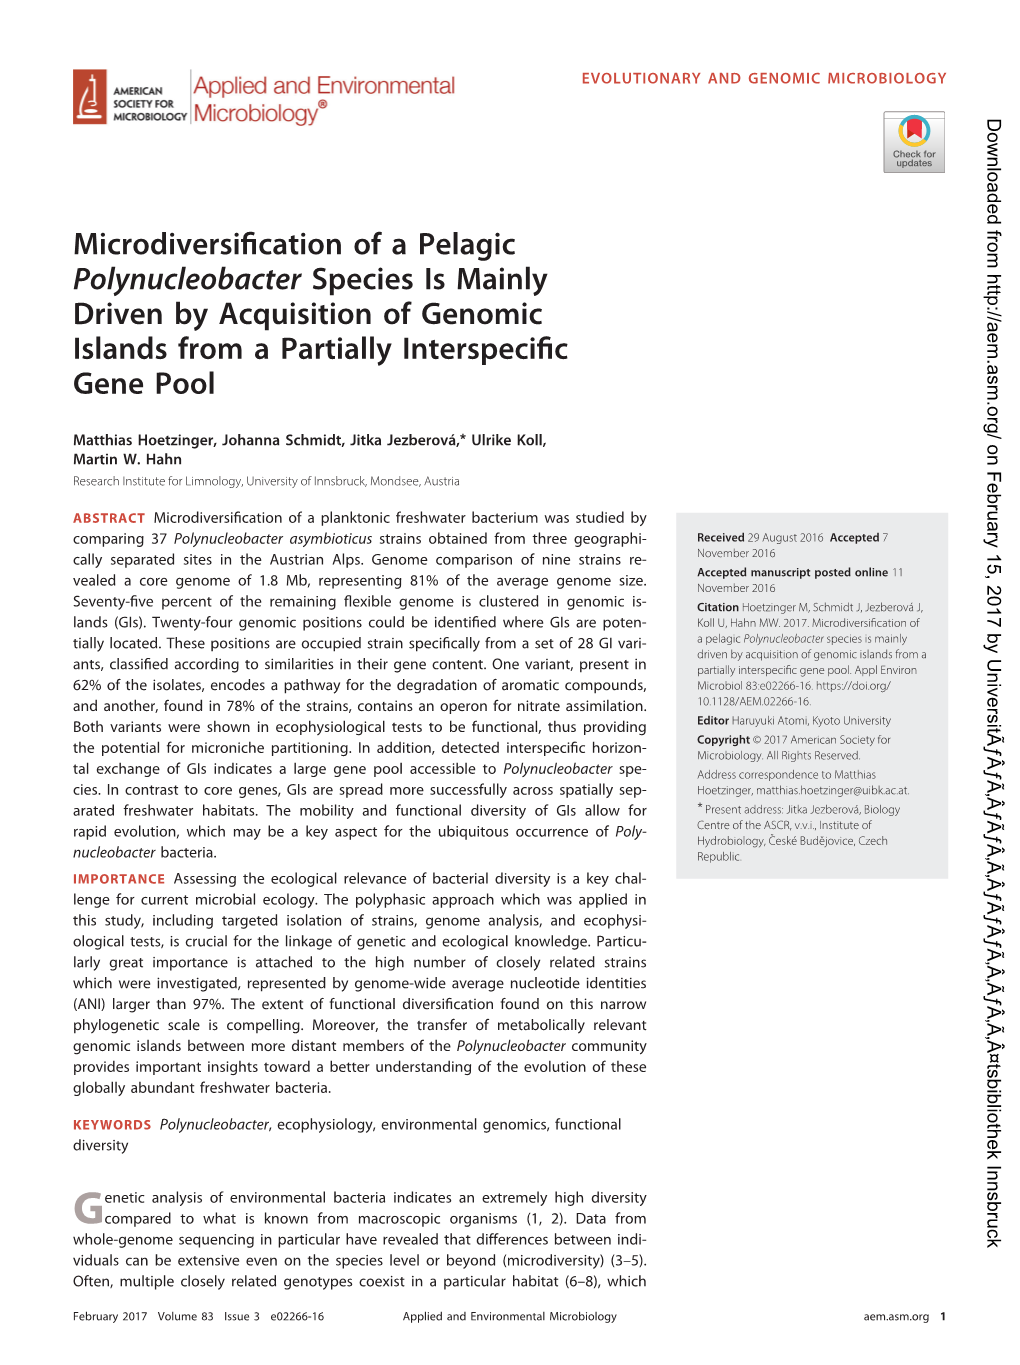 Microdiversification of a Pelagic Polynucleobacter Species Is Mainly